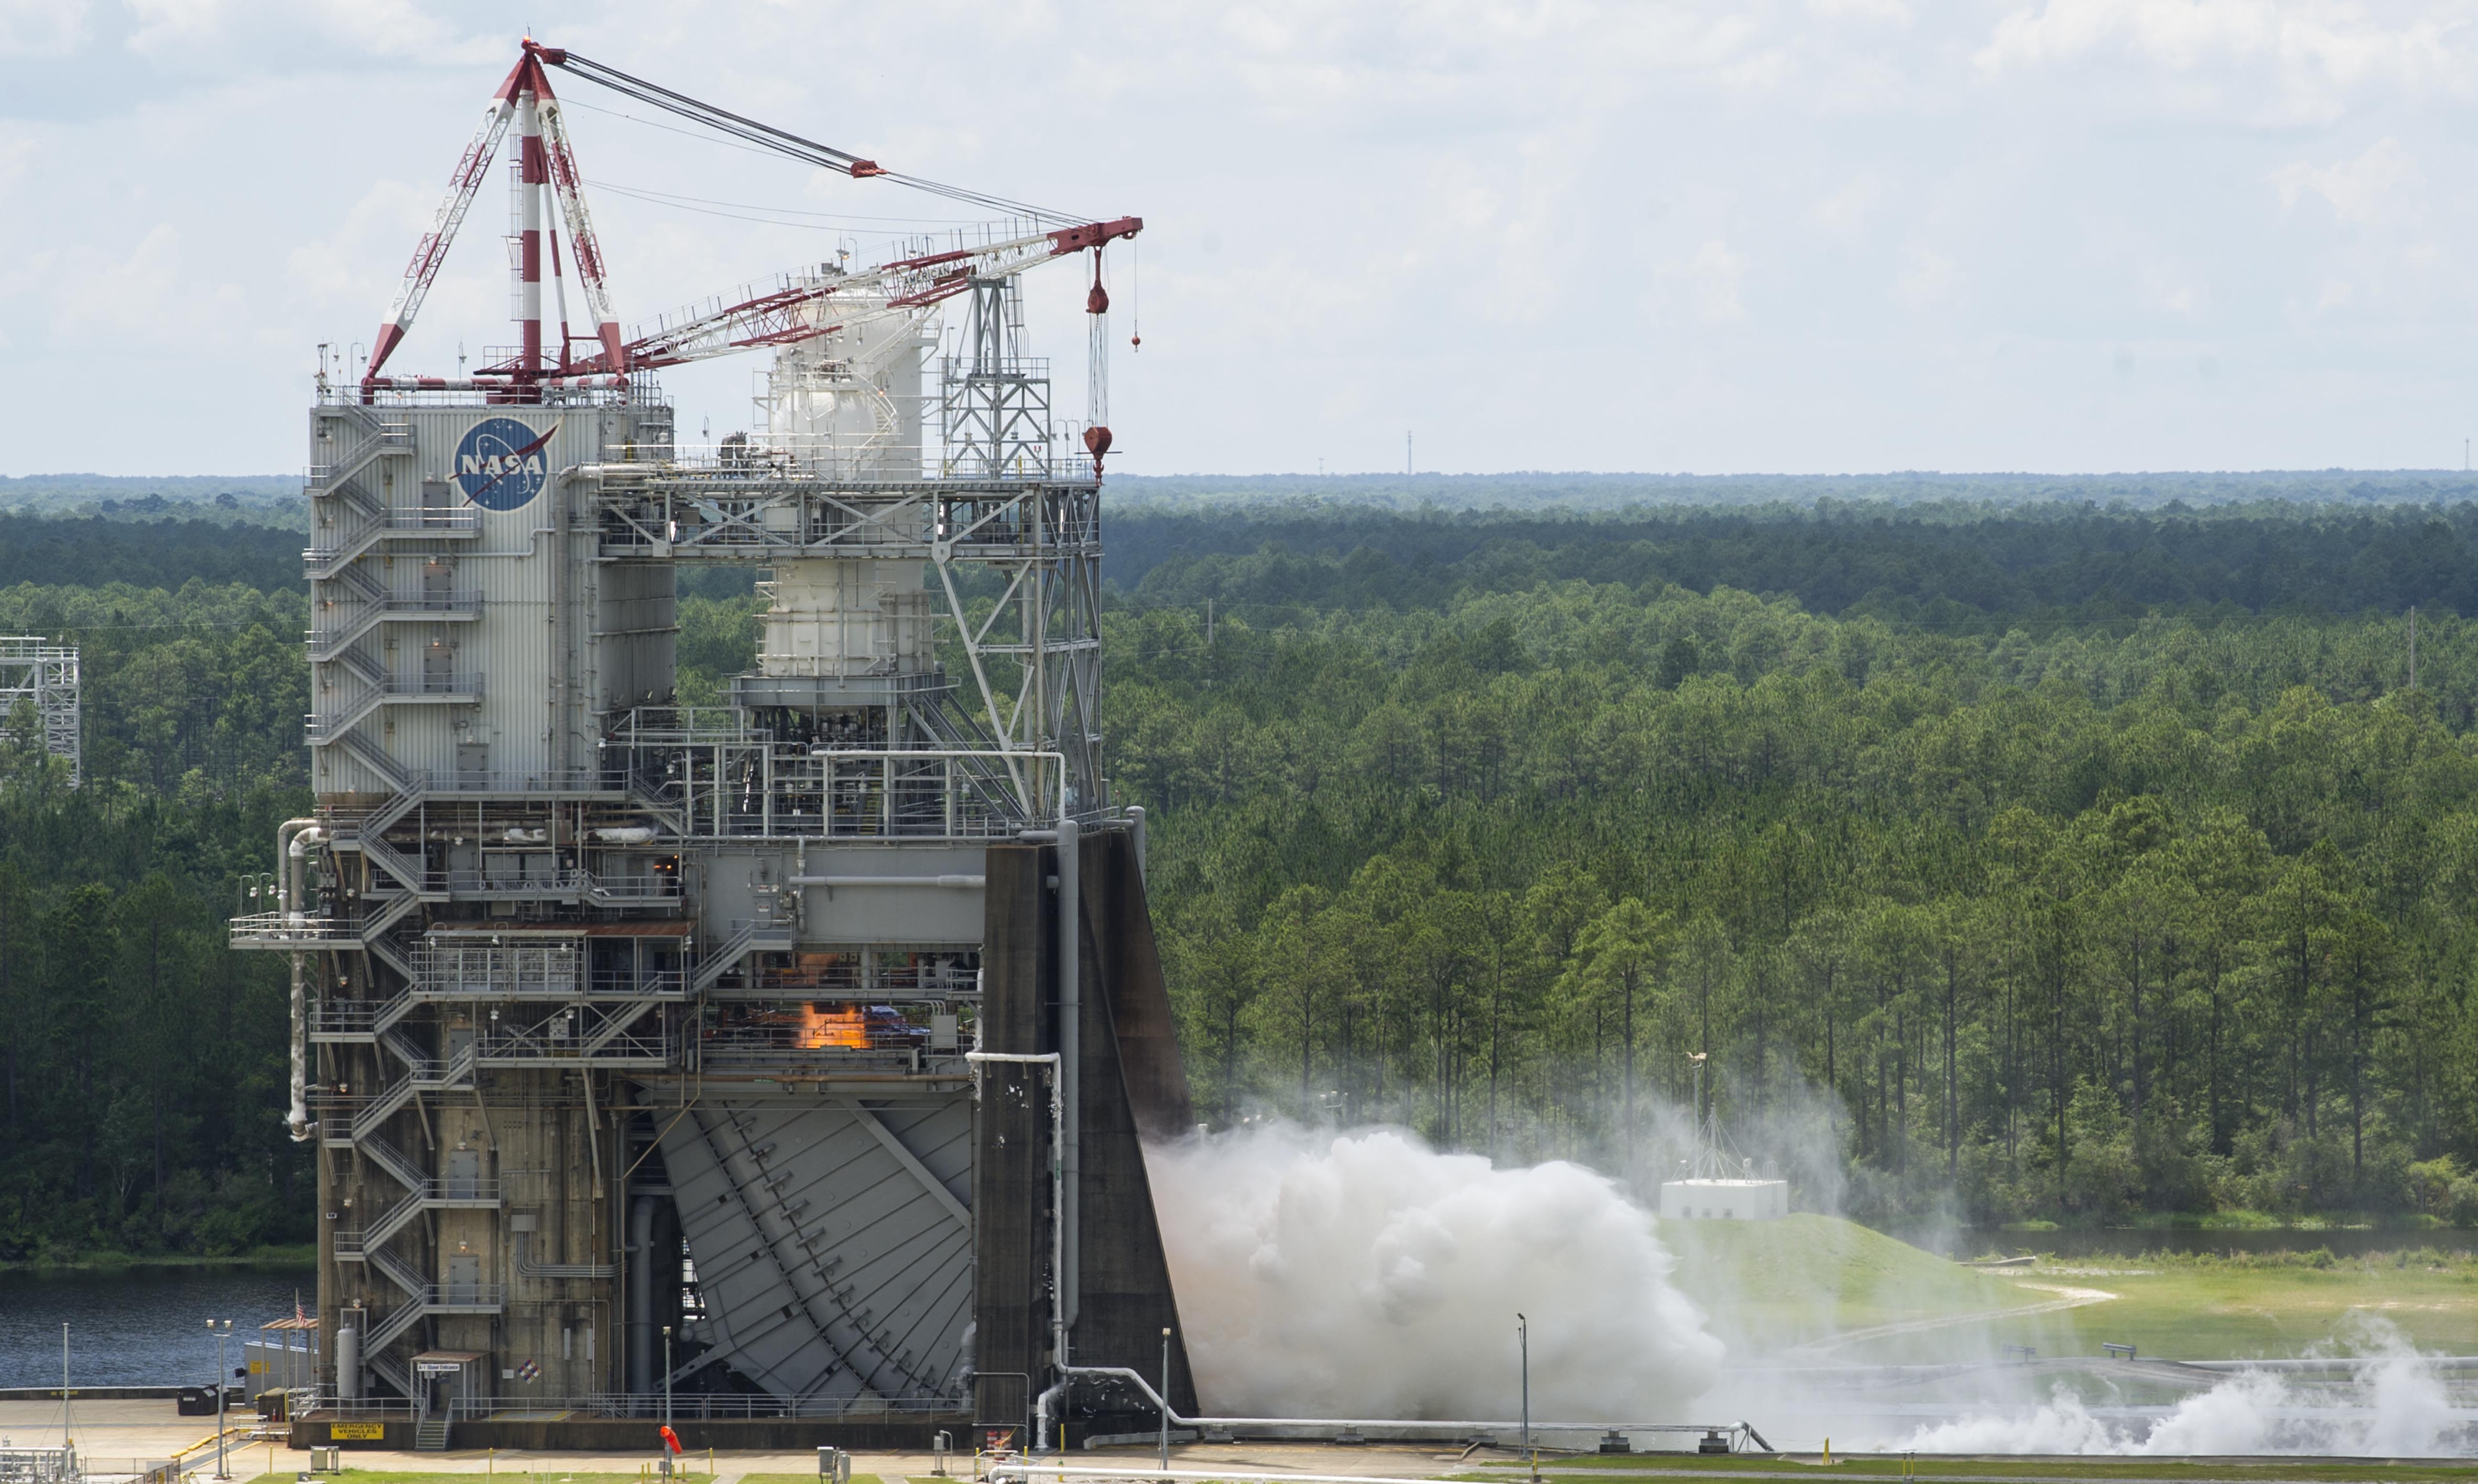 The RS-25 engine fires up at the beginning of a 500-second test June 11 at NASA's Stennis Space Center near Bay St. Louis, Miss.